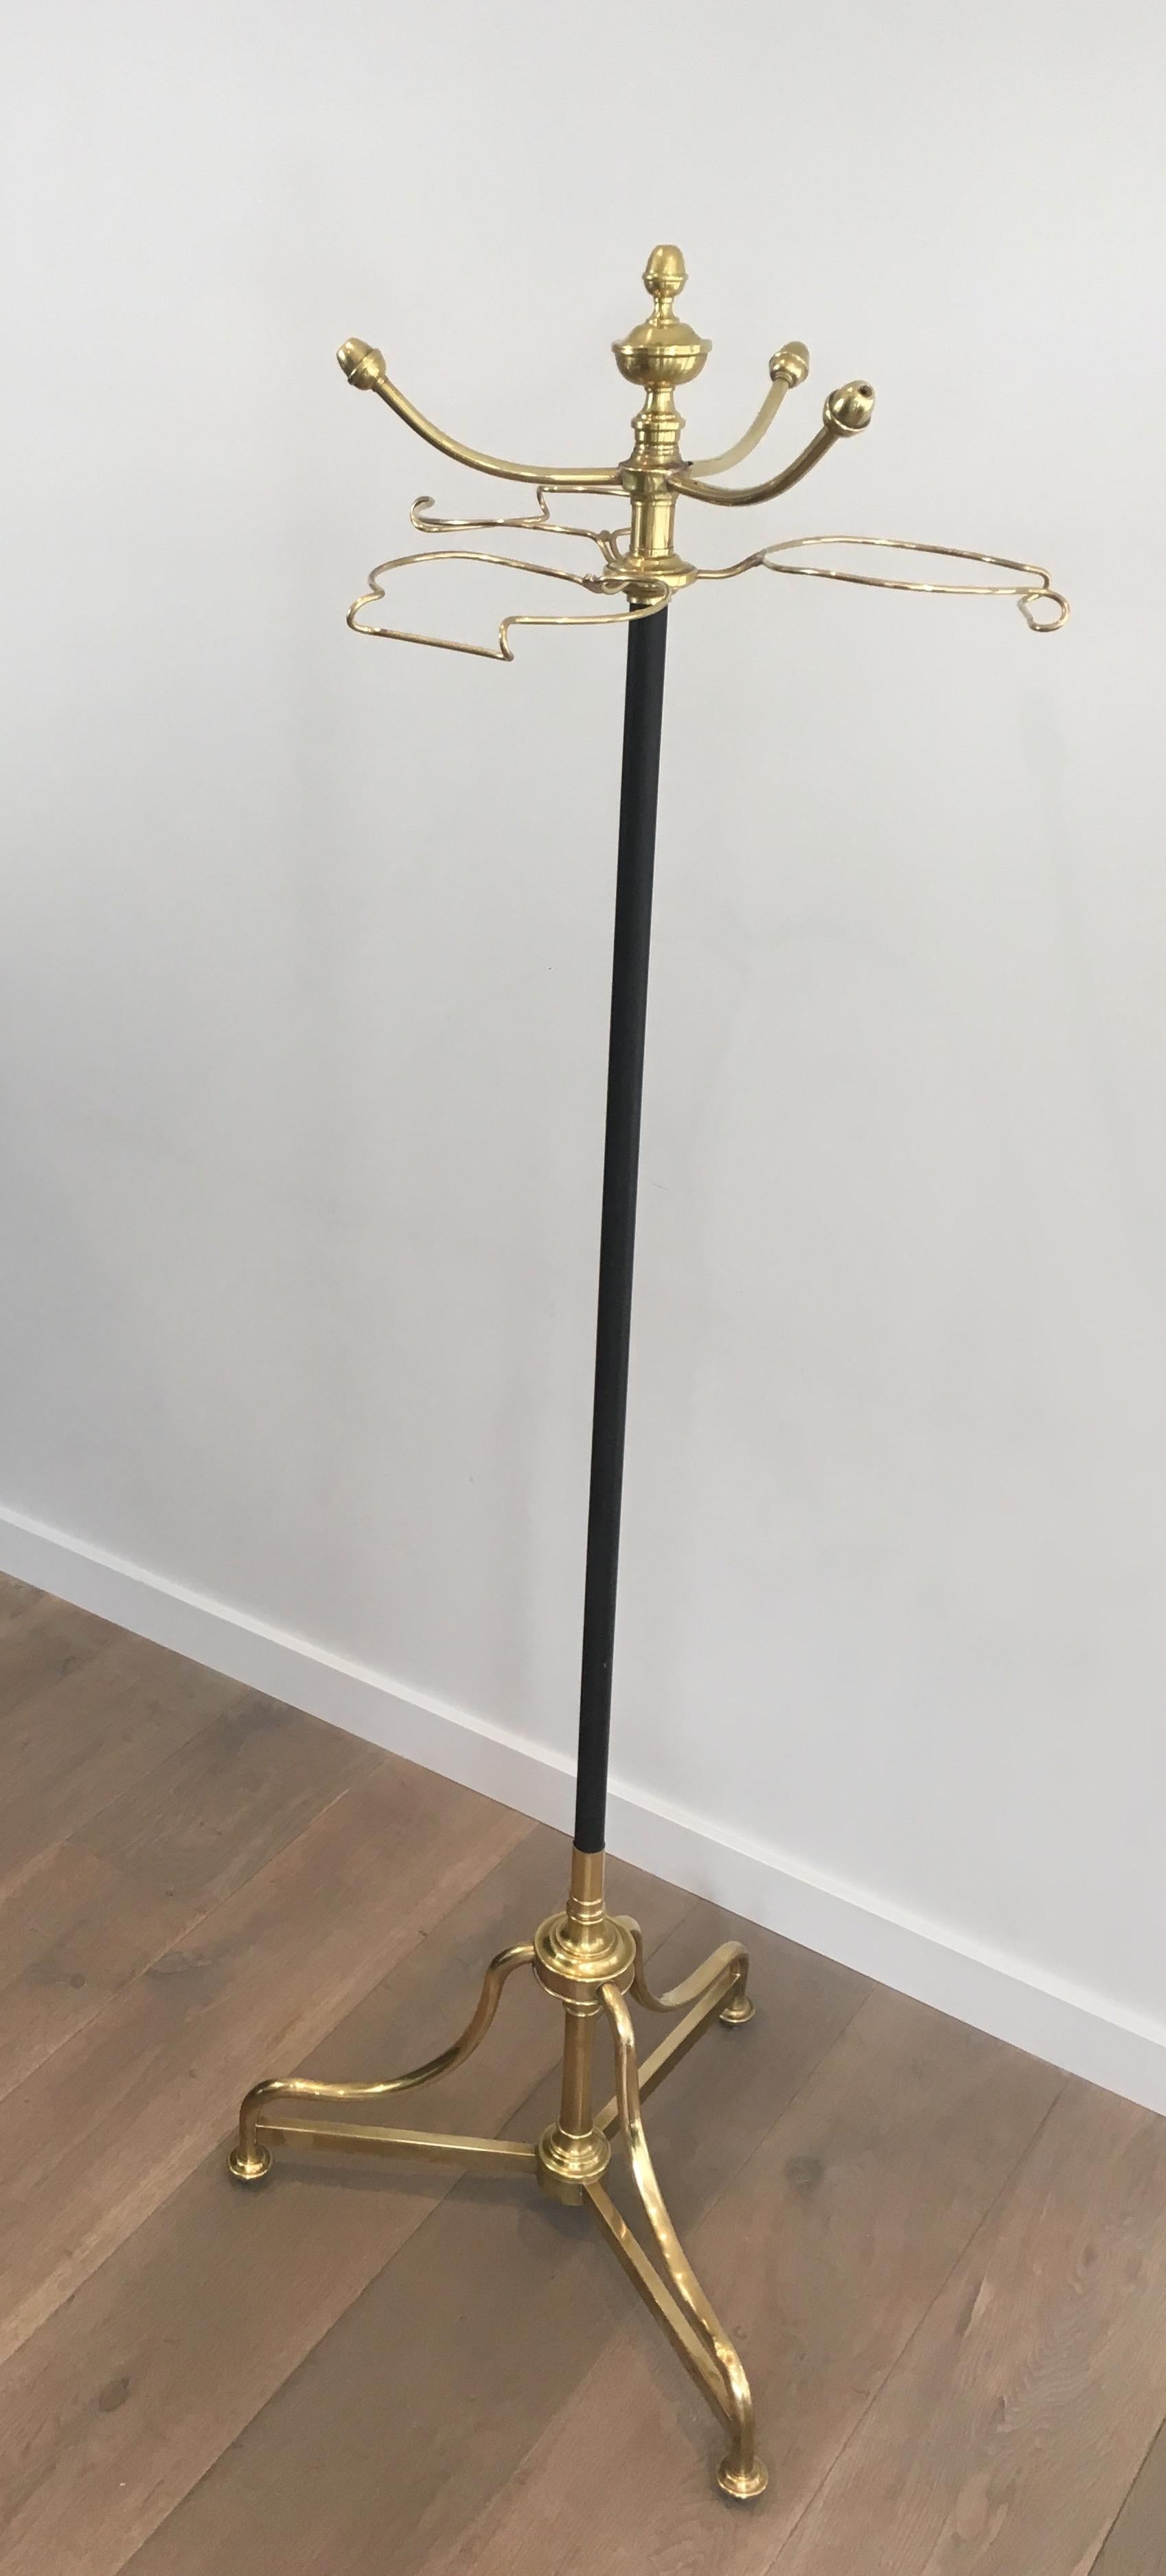 Unusual Tall Black Lacquered and Brass Coat and Hat Rack, French, circa 1900 For Sale 6